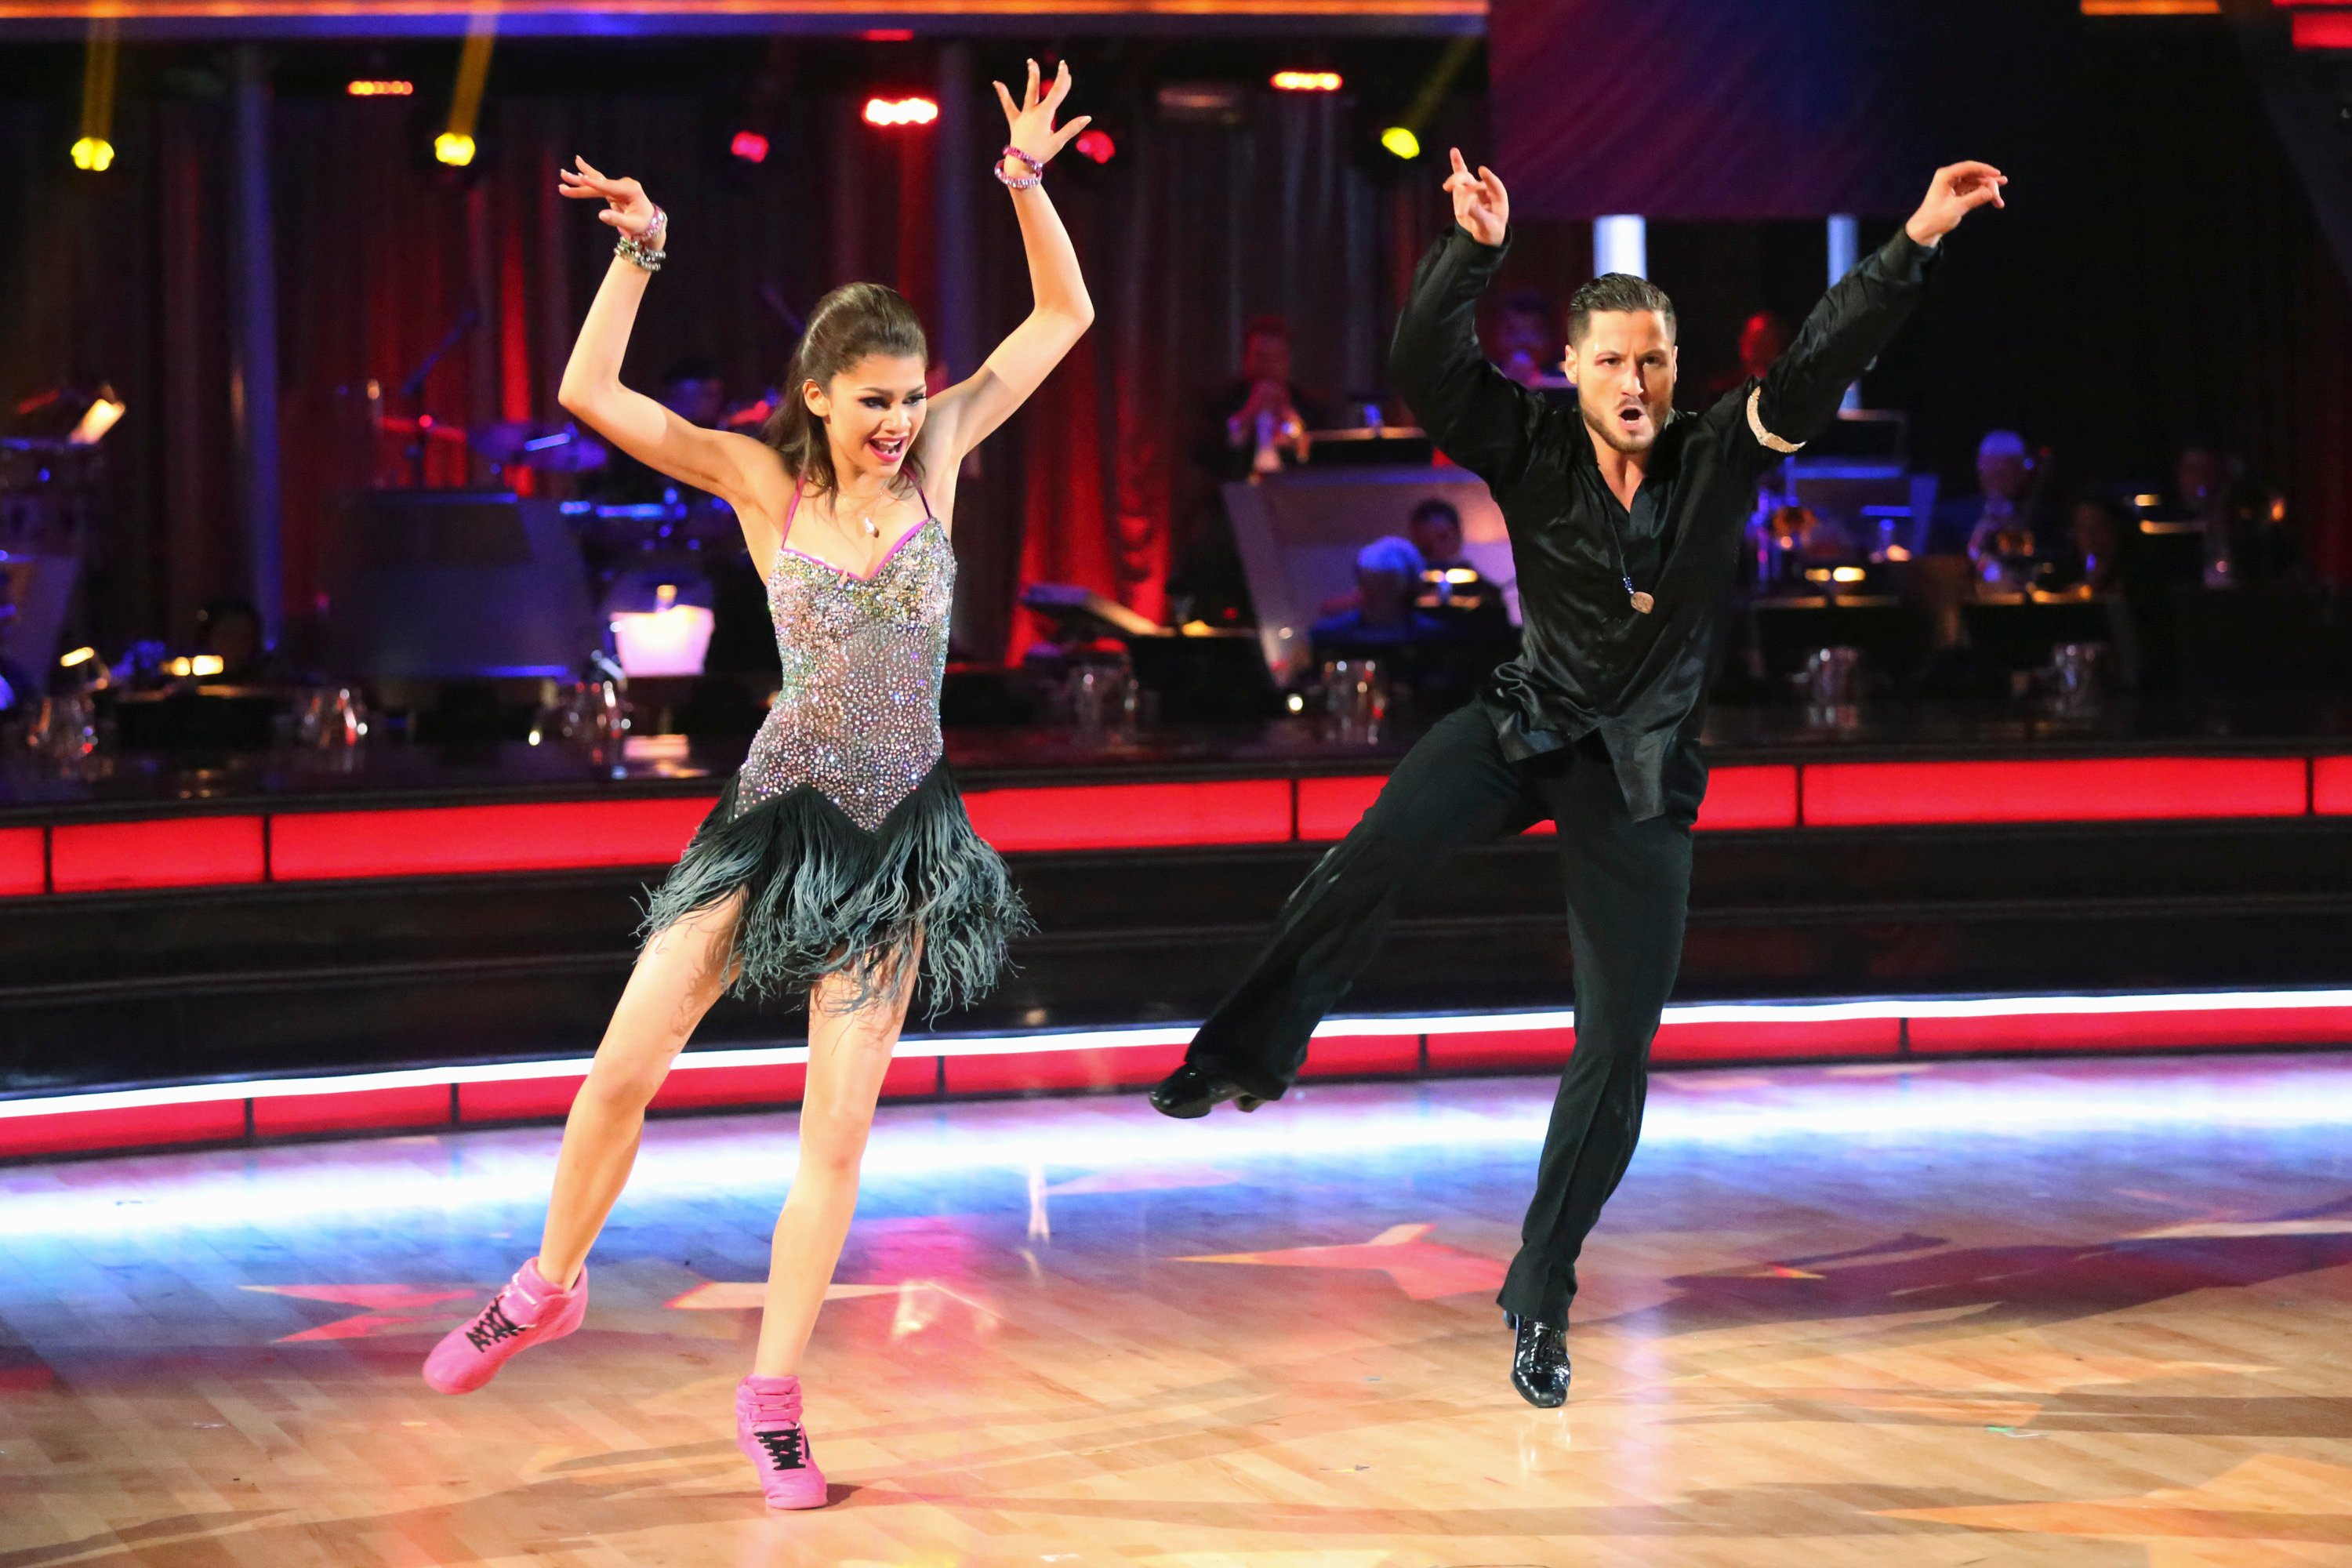 Zendaya and her partner on ABC's 'Dancing With the Stars' 